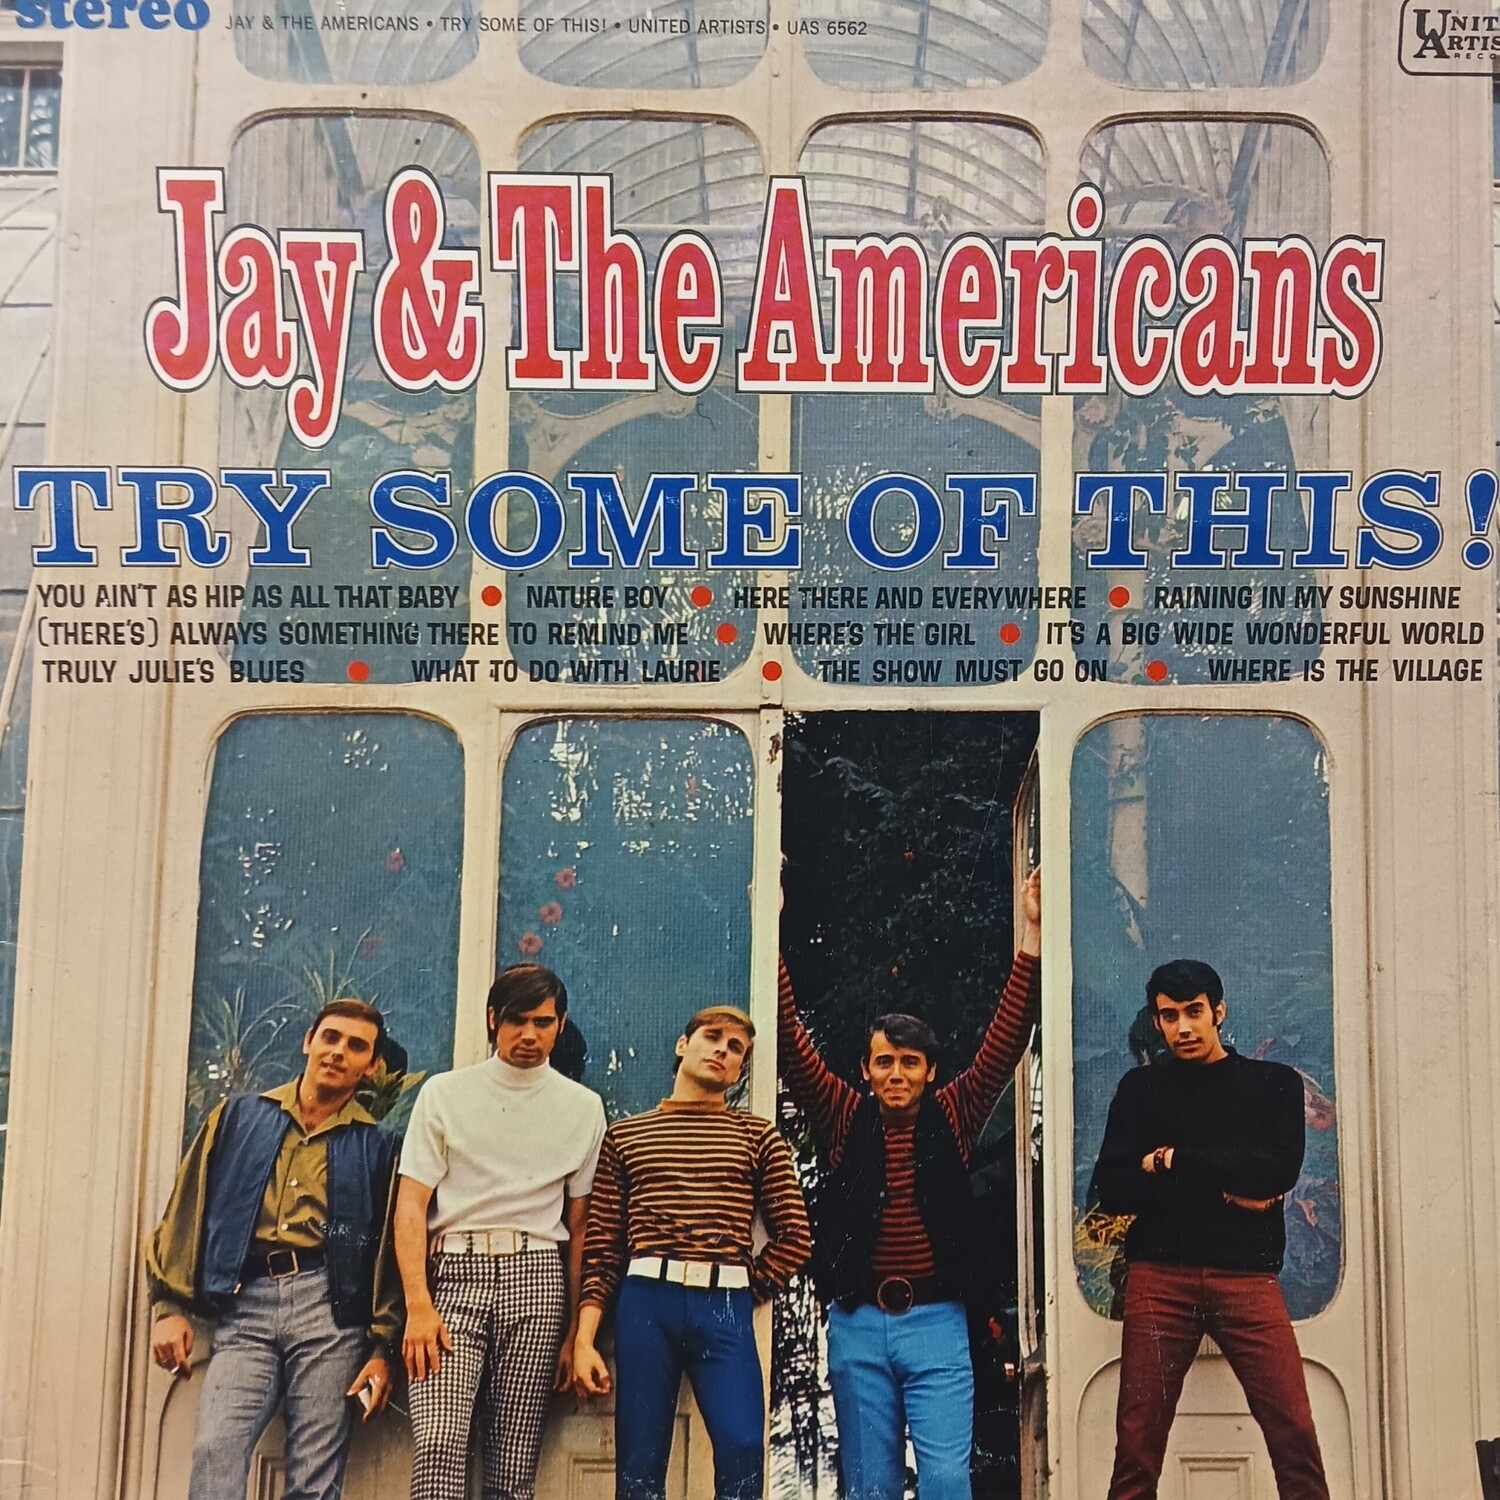 JAY AND THE AMERICANS - Try some of this